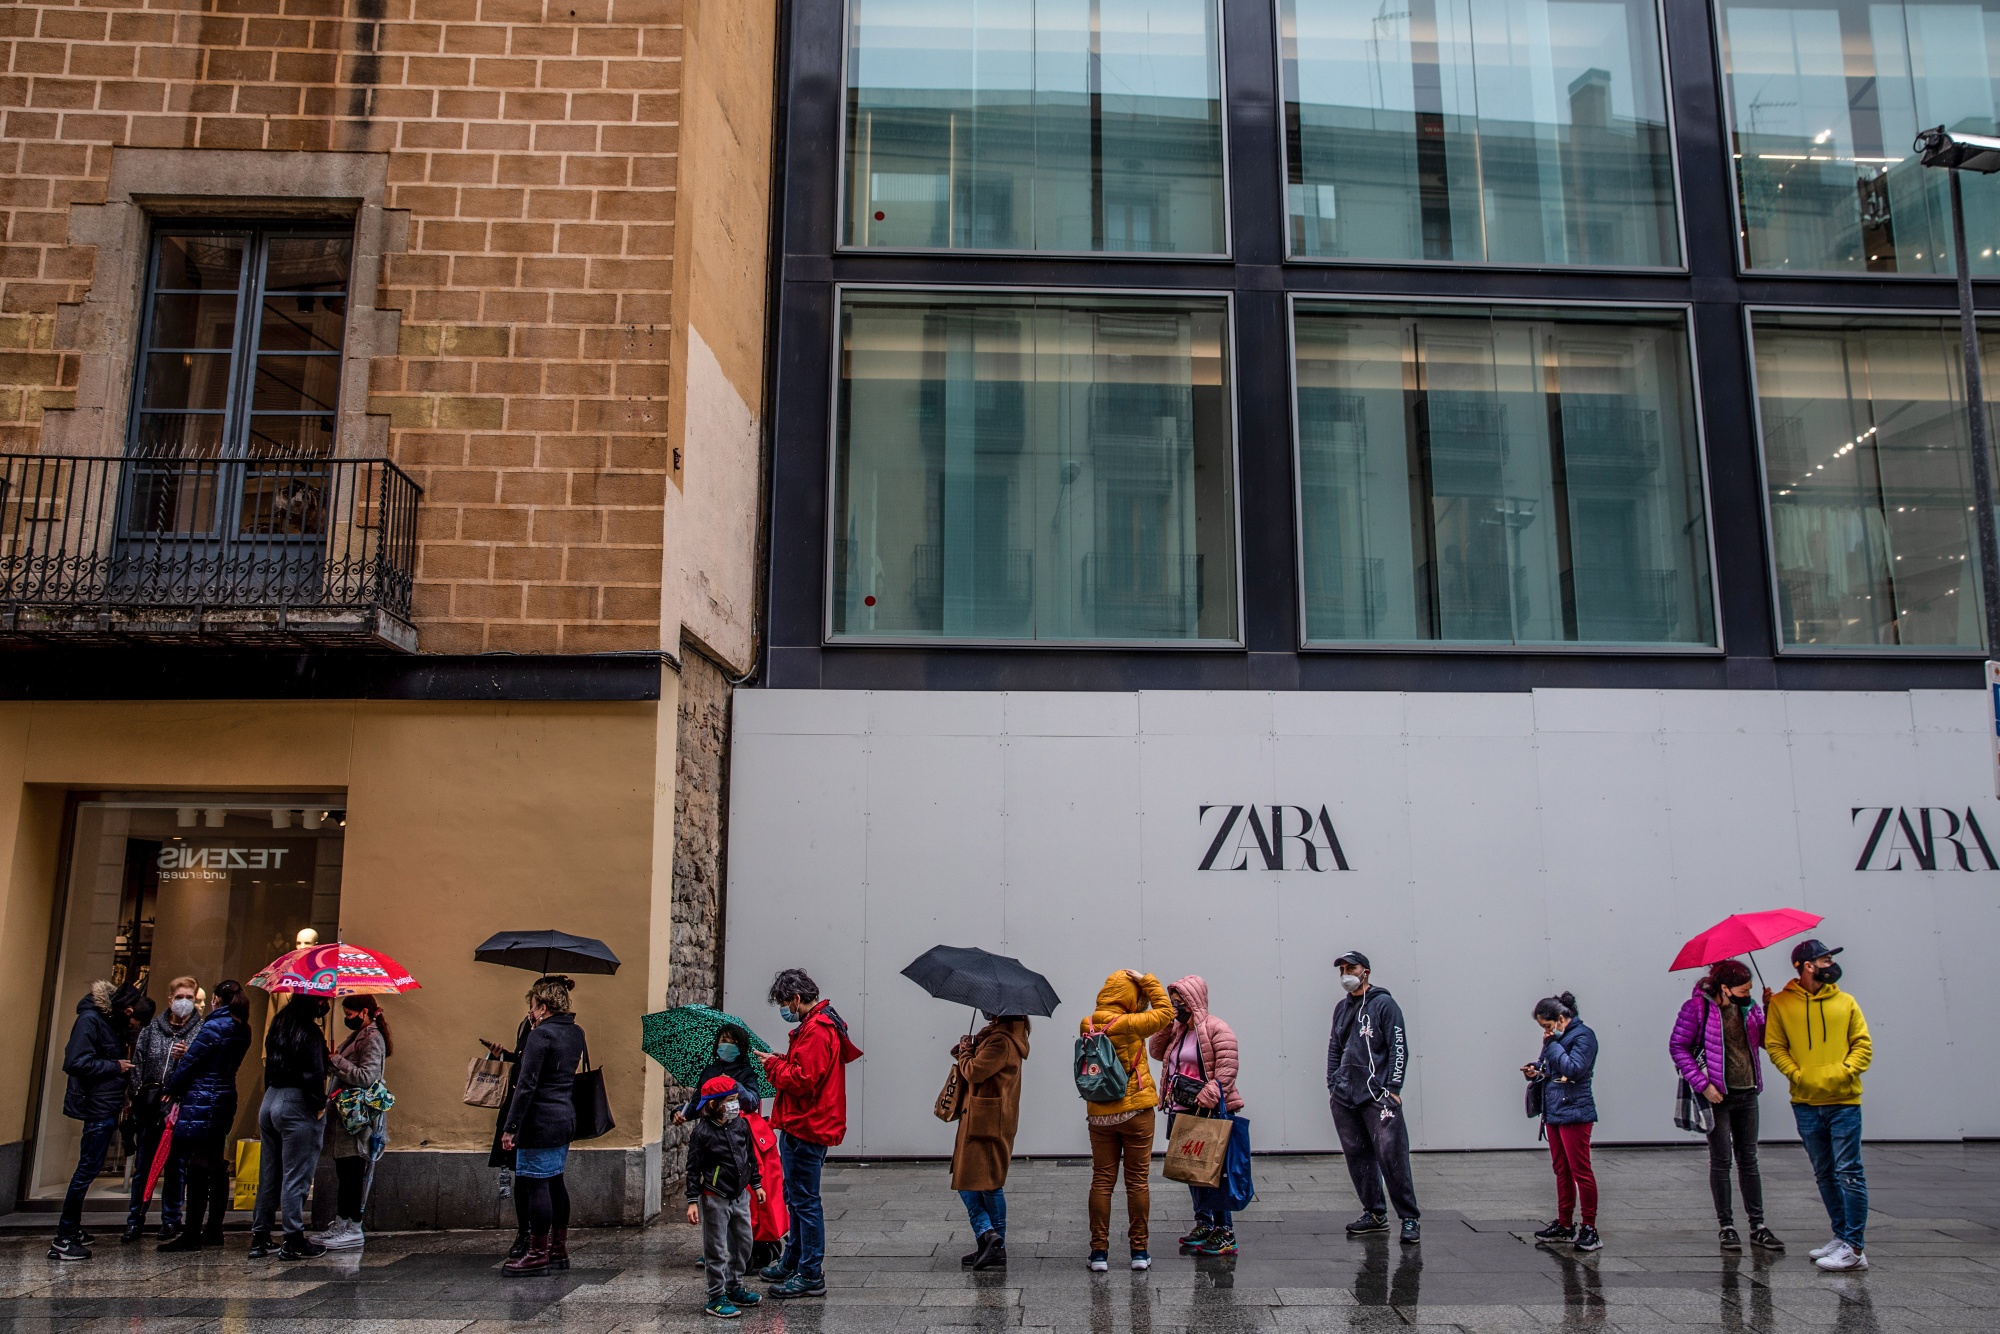 Supply Chain Latest: Zara Owner Succeeds With Regional Networks - Bloomberg